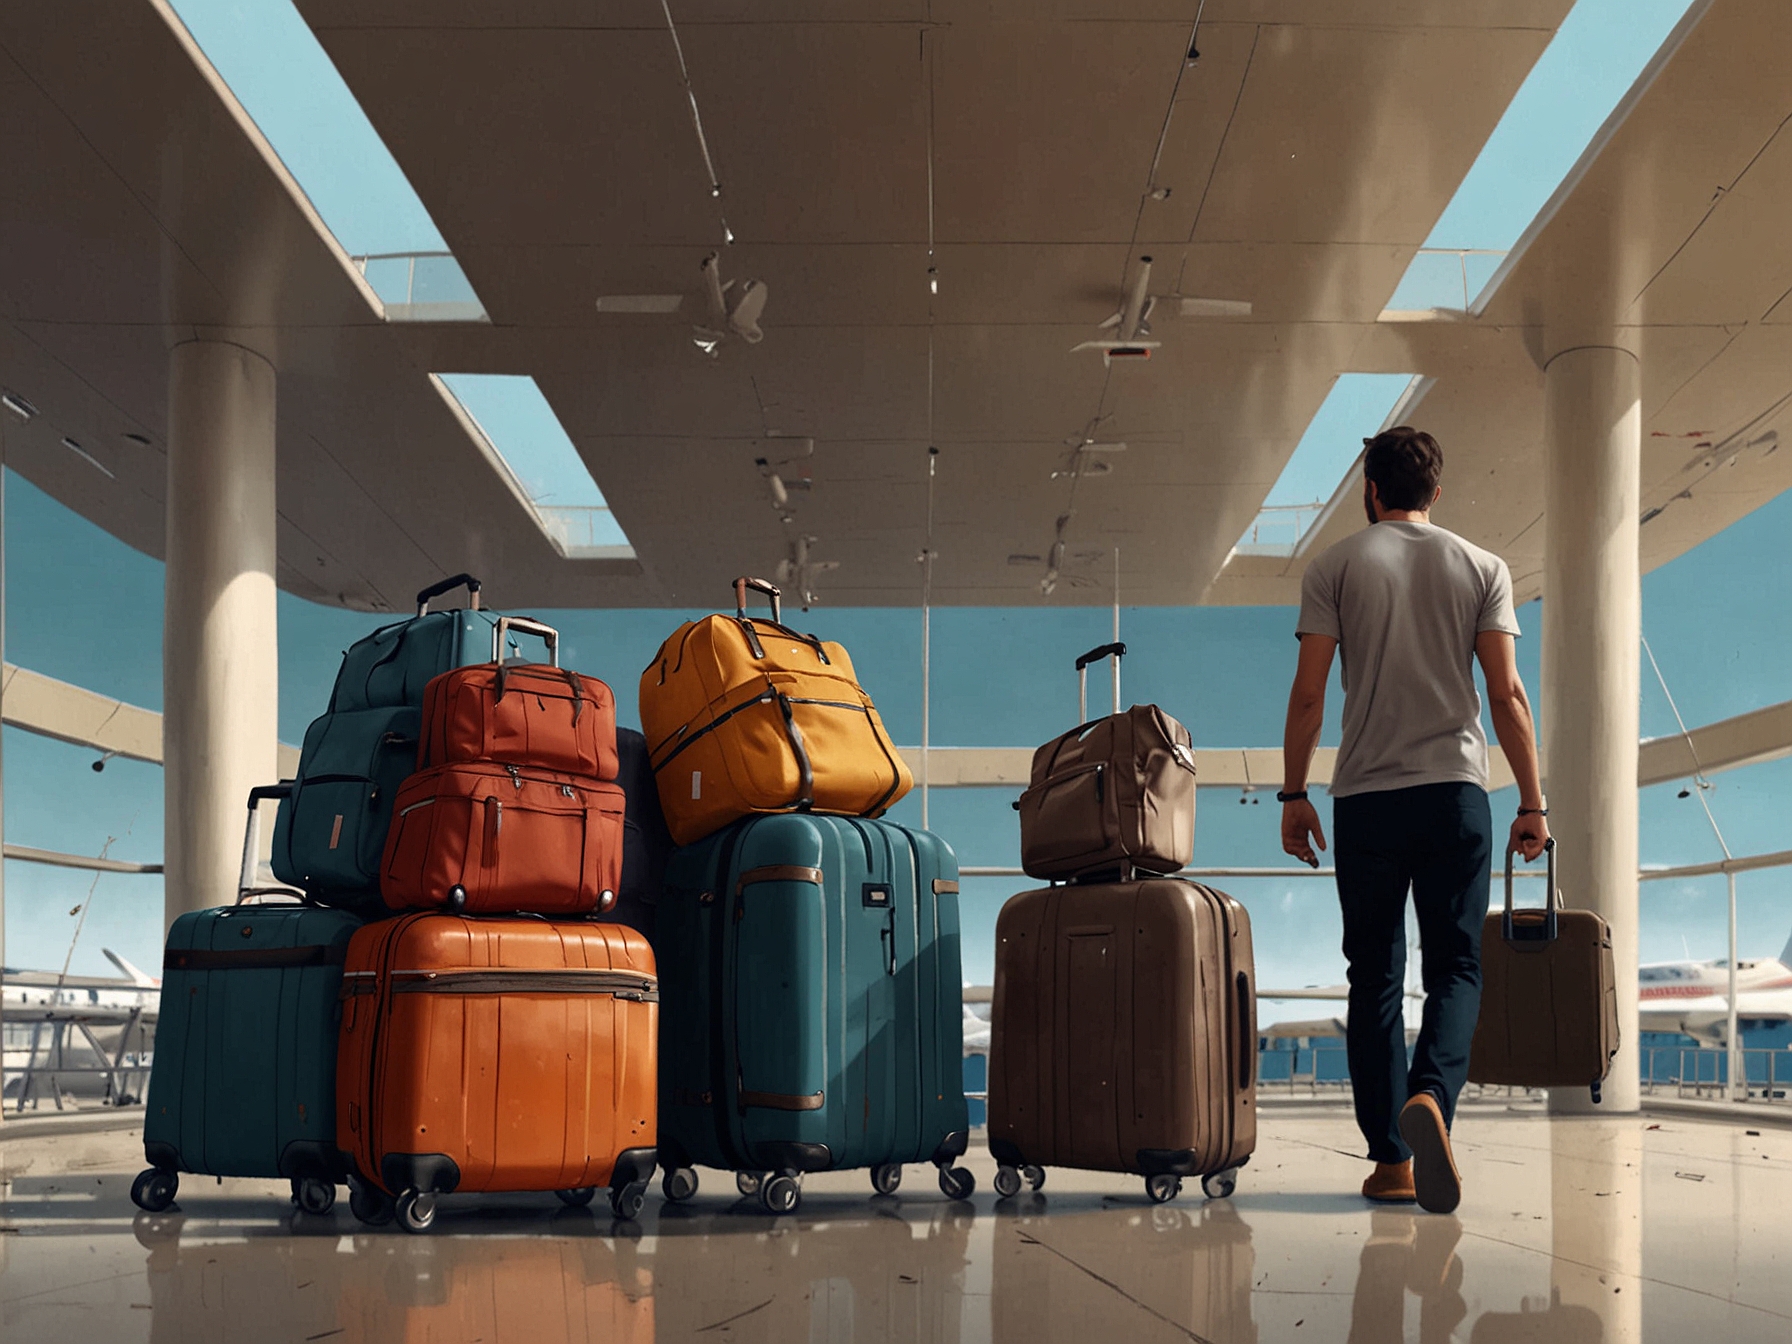 A traveler juggles multiple overpacked suitcases at an airport, illustrating the stress and inconvenience of overpacking and the benefits of packing light.